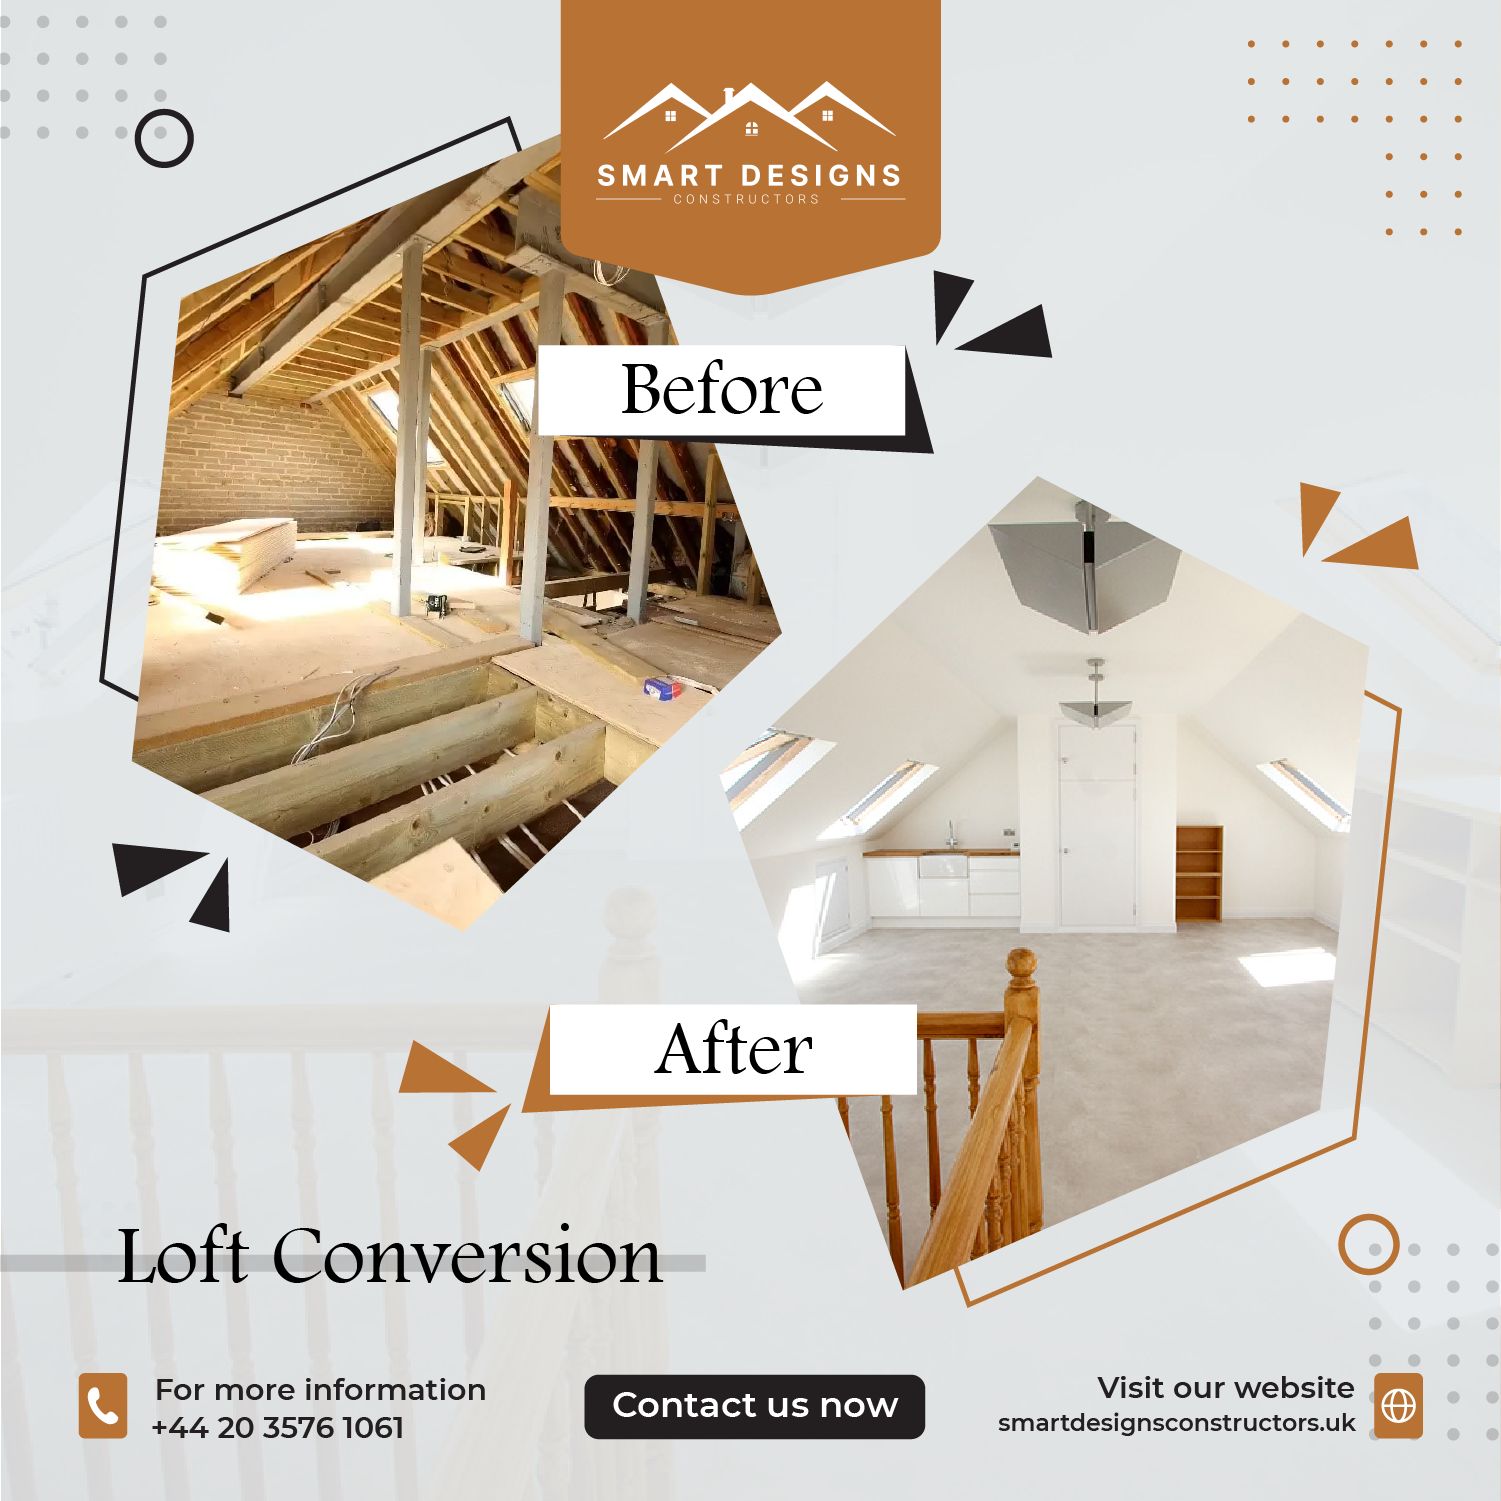 You are currently viewing Convert Your Loft in London with Smart Designs Constructors Ltd!